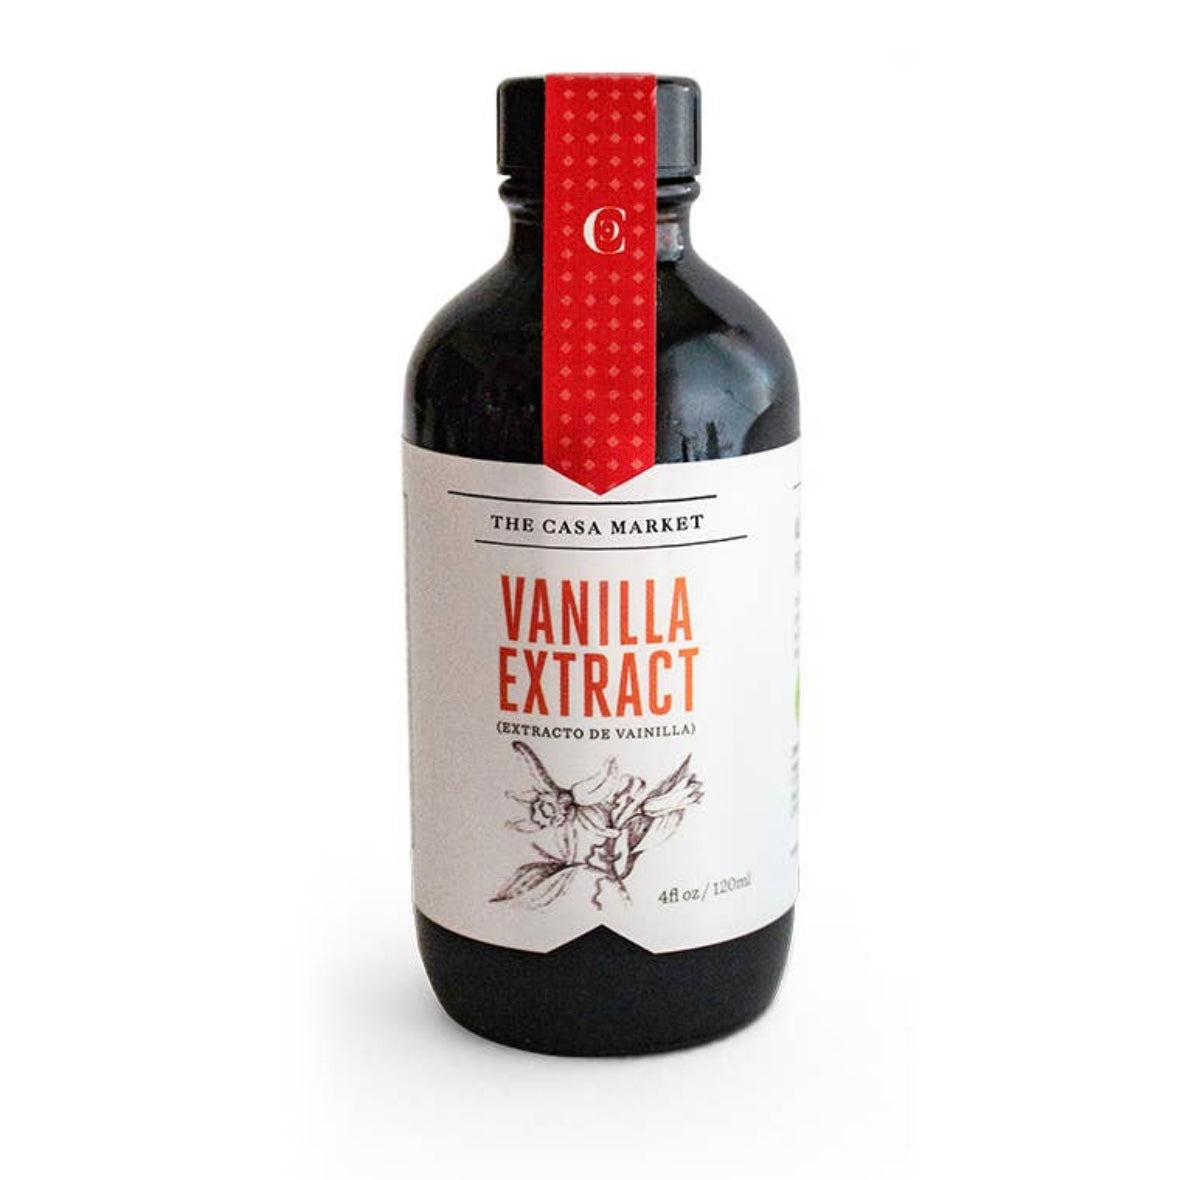 Vanilla Extract in glass branded bottle with cap.